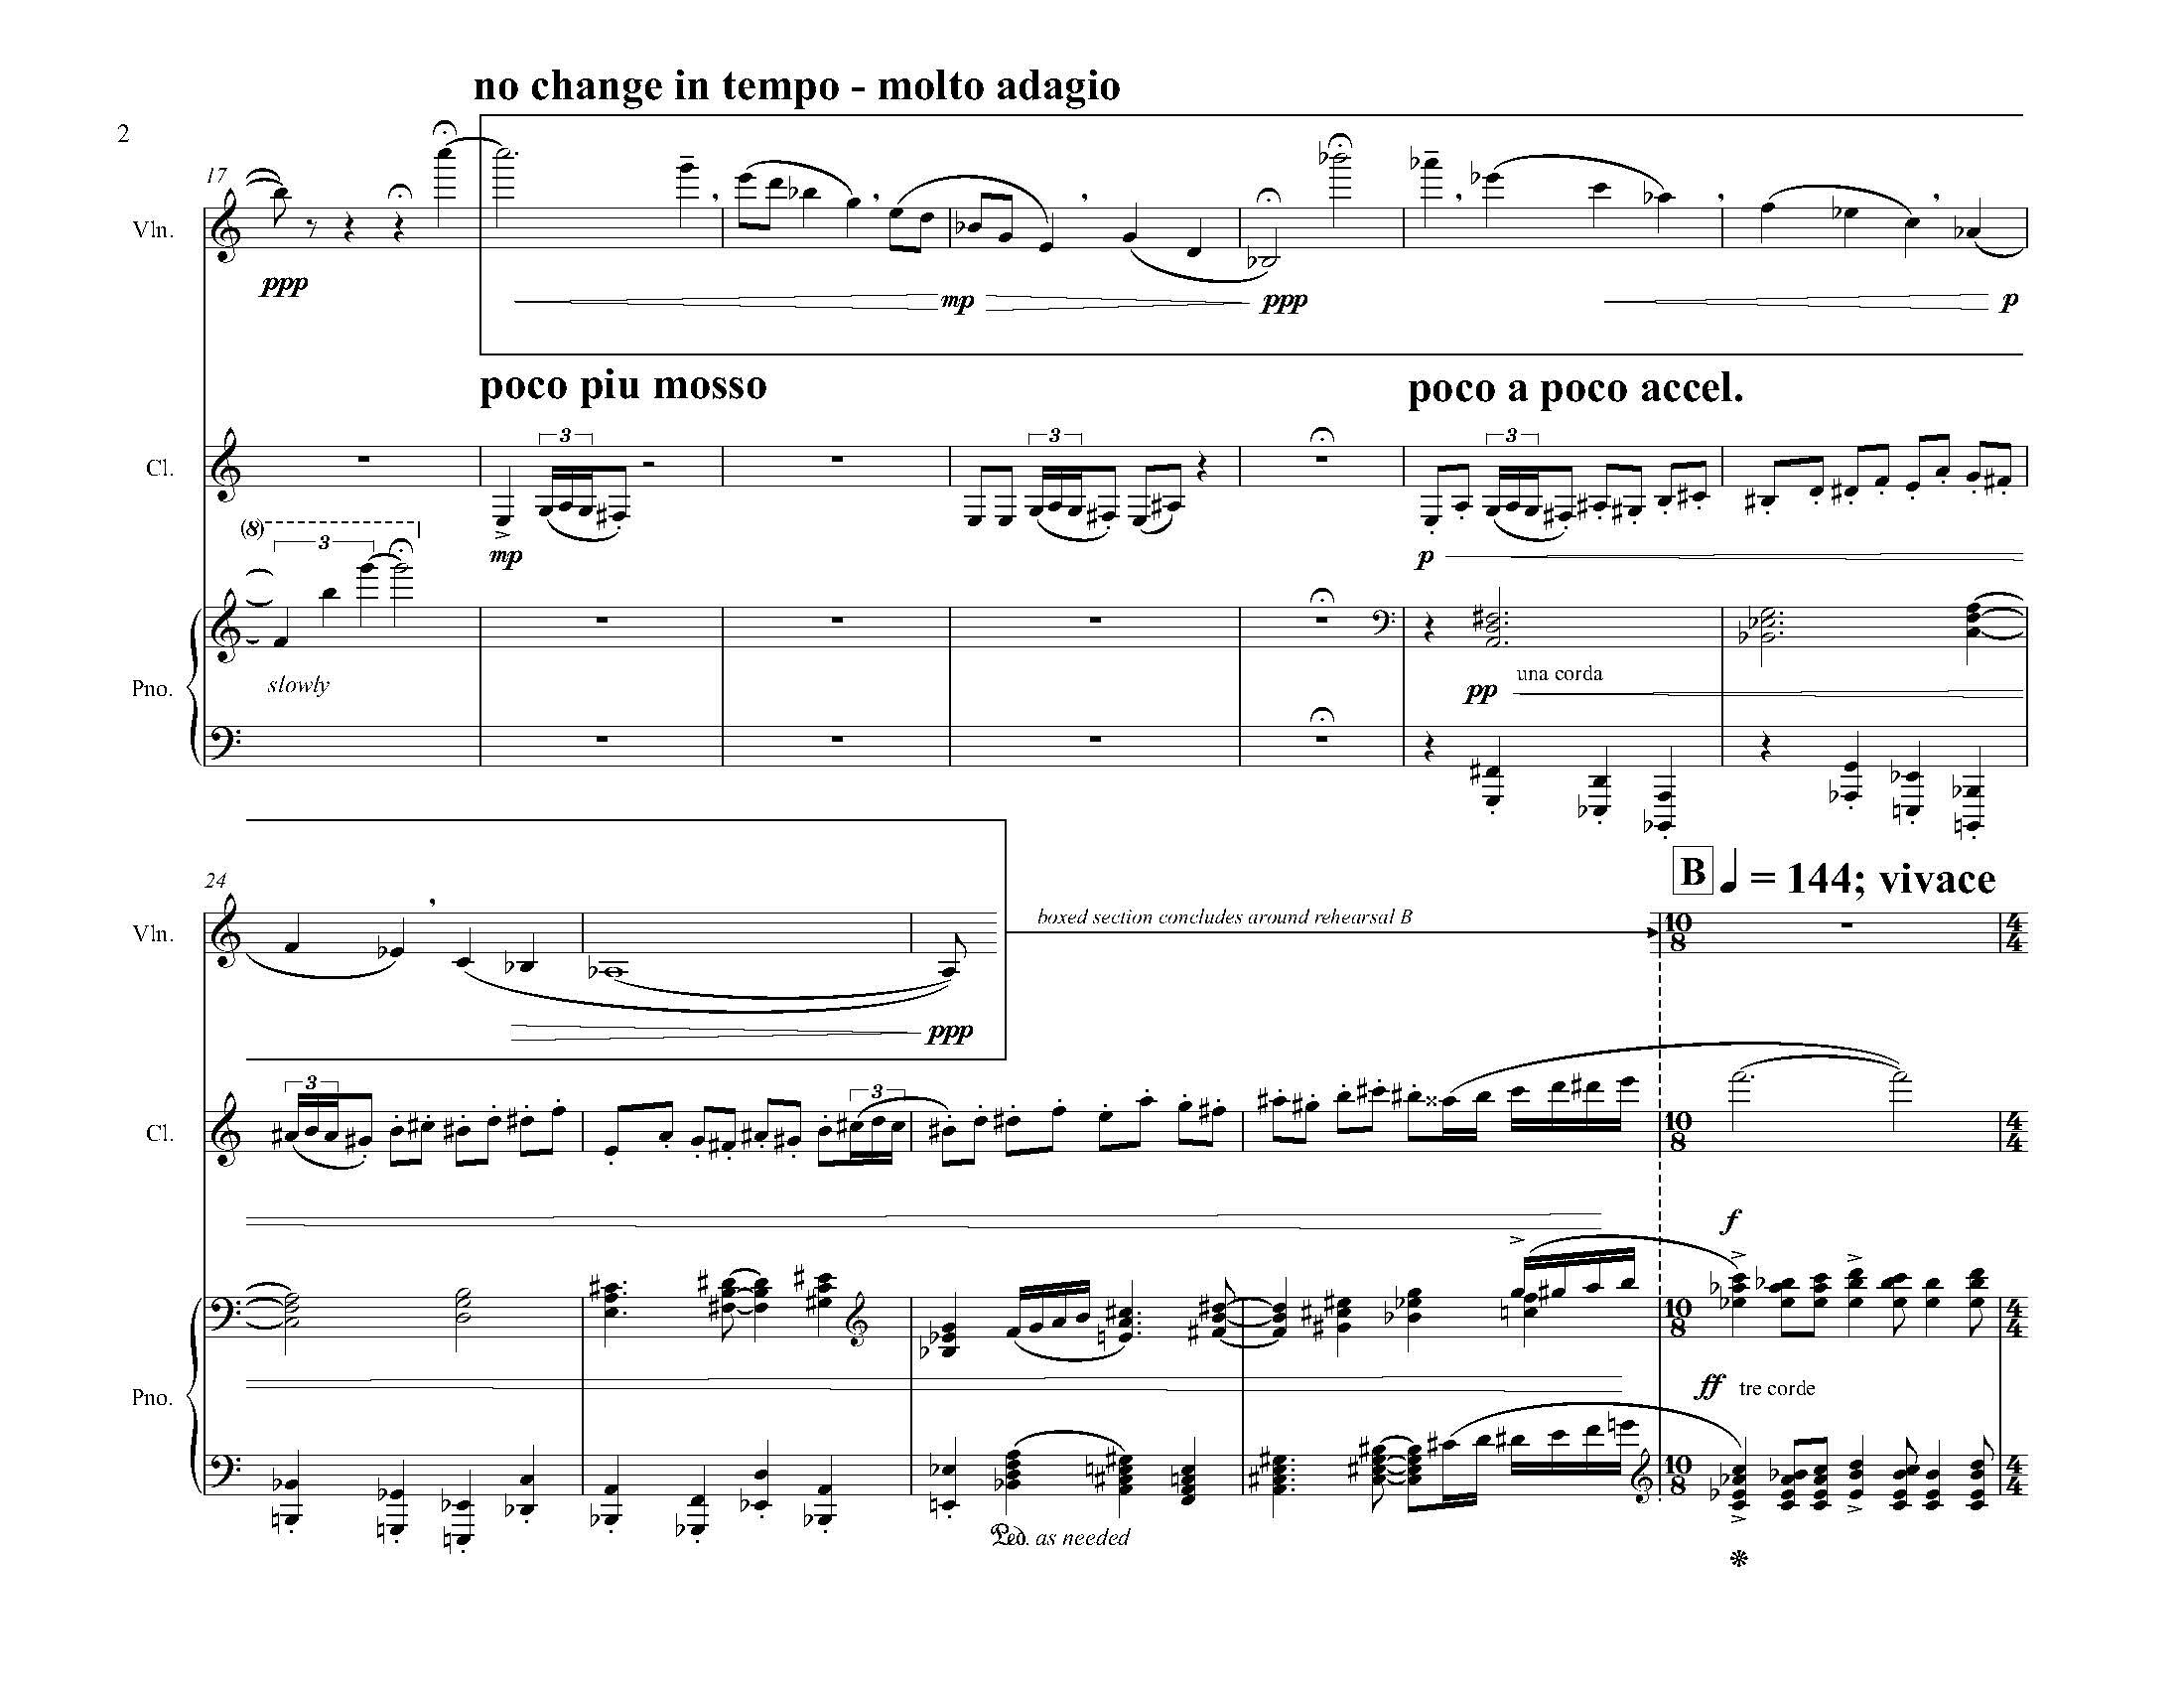 Teach the Torches to Burn Bright - Complete Score_Page_08.jpg